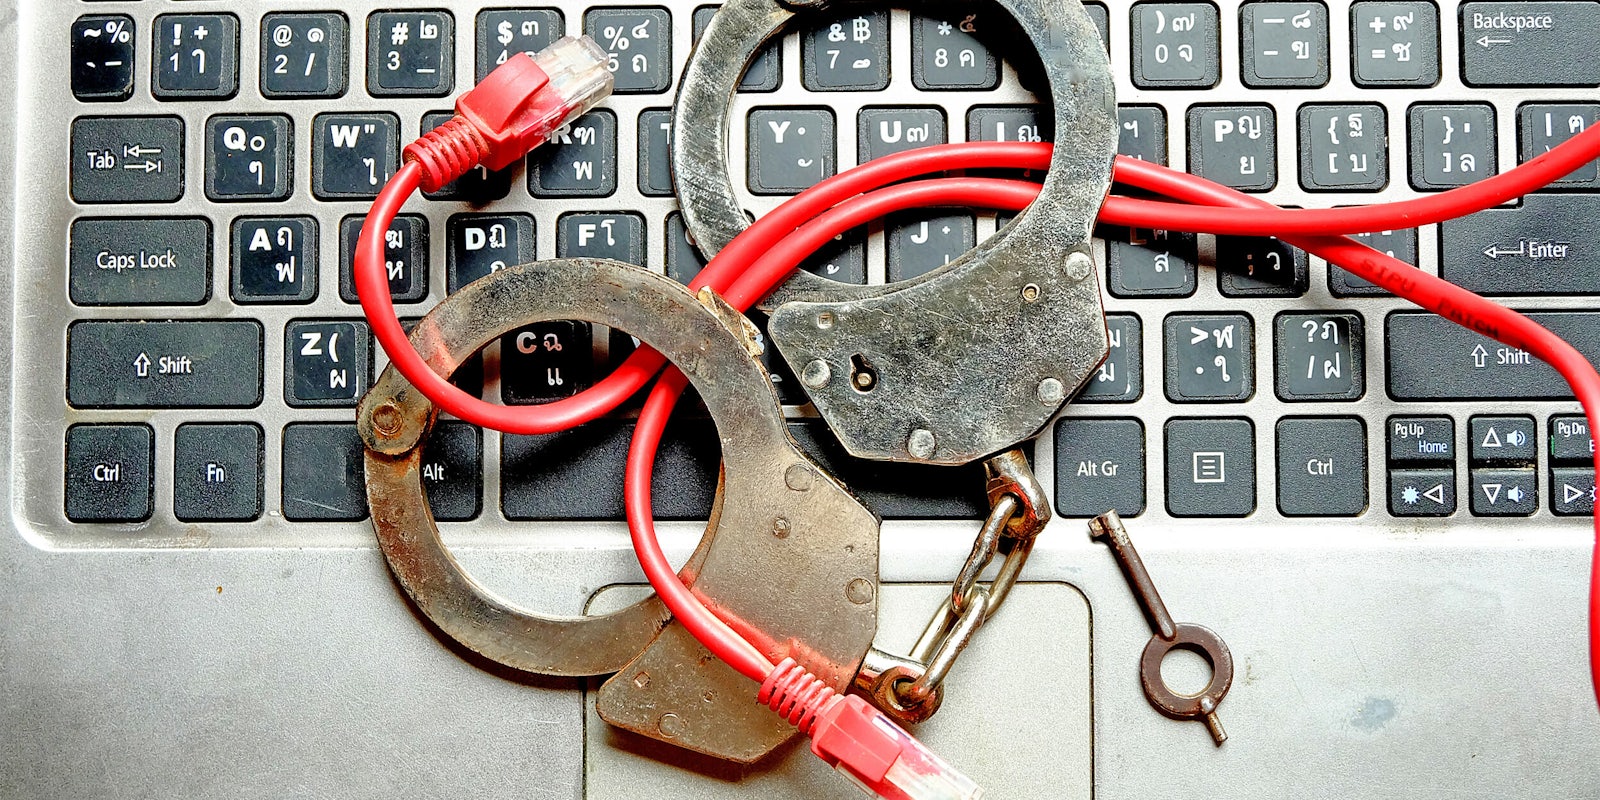 Handcuffs on ethernet cables on keyboard CLOUD Act